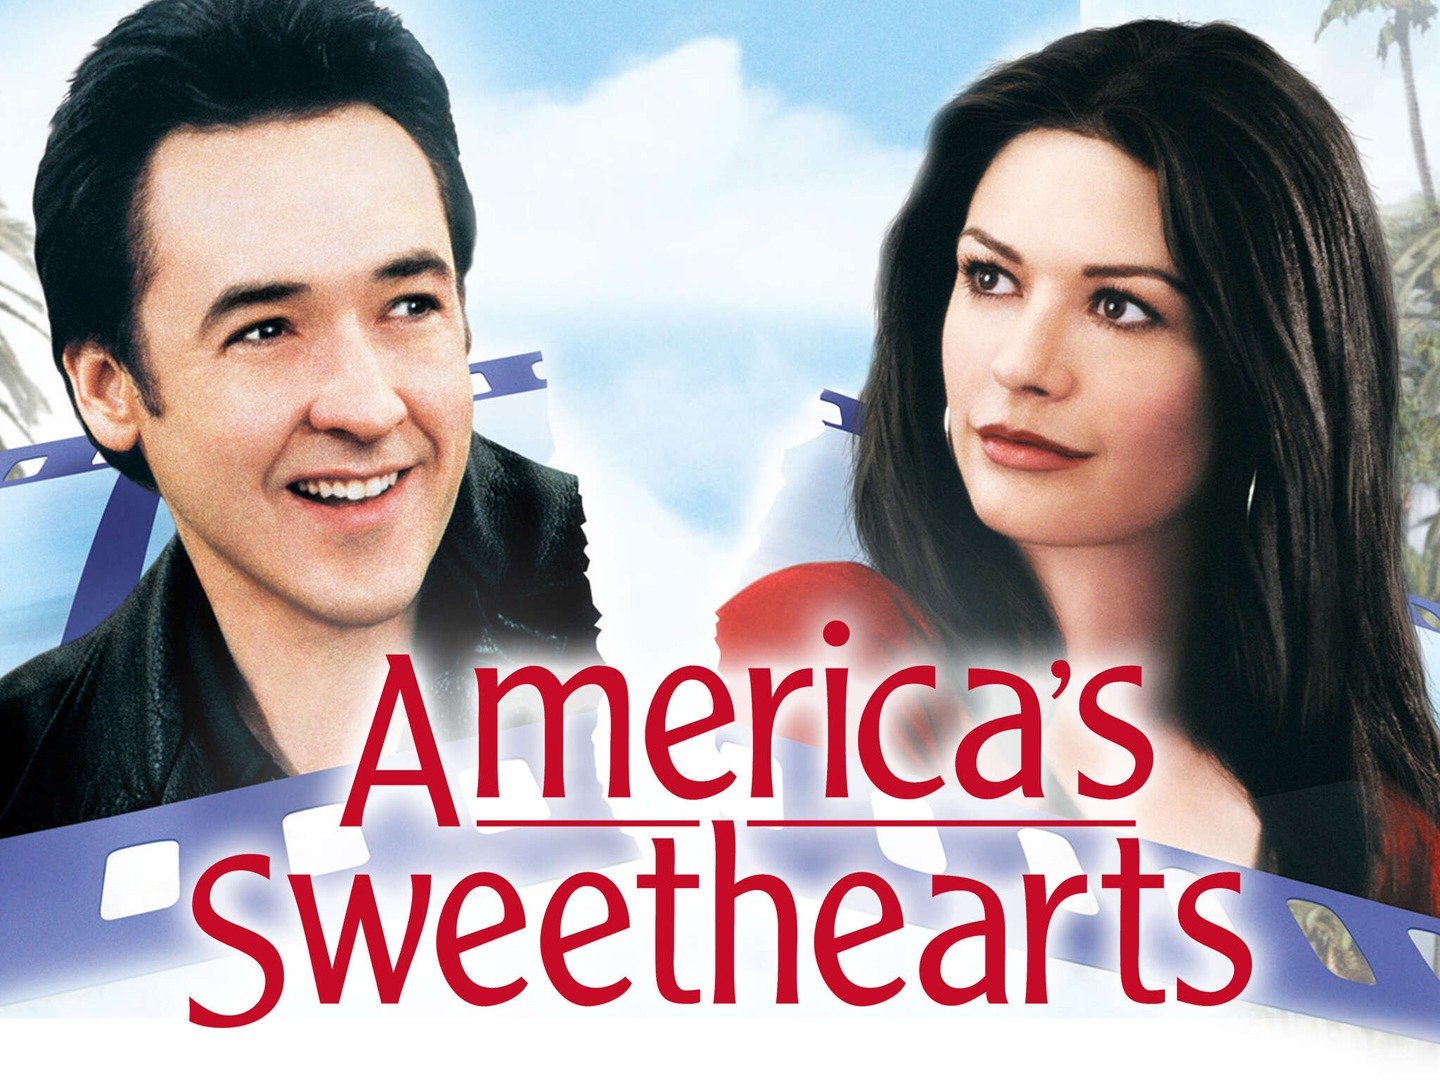 America S Sweethearts Trailer 1 Trailers And Videos Rotten Tomatoes